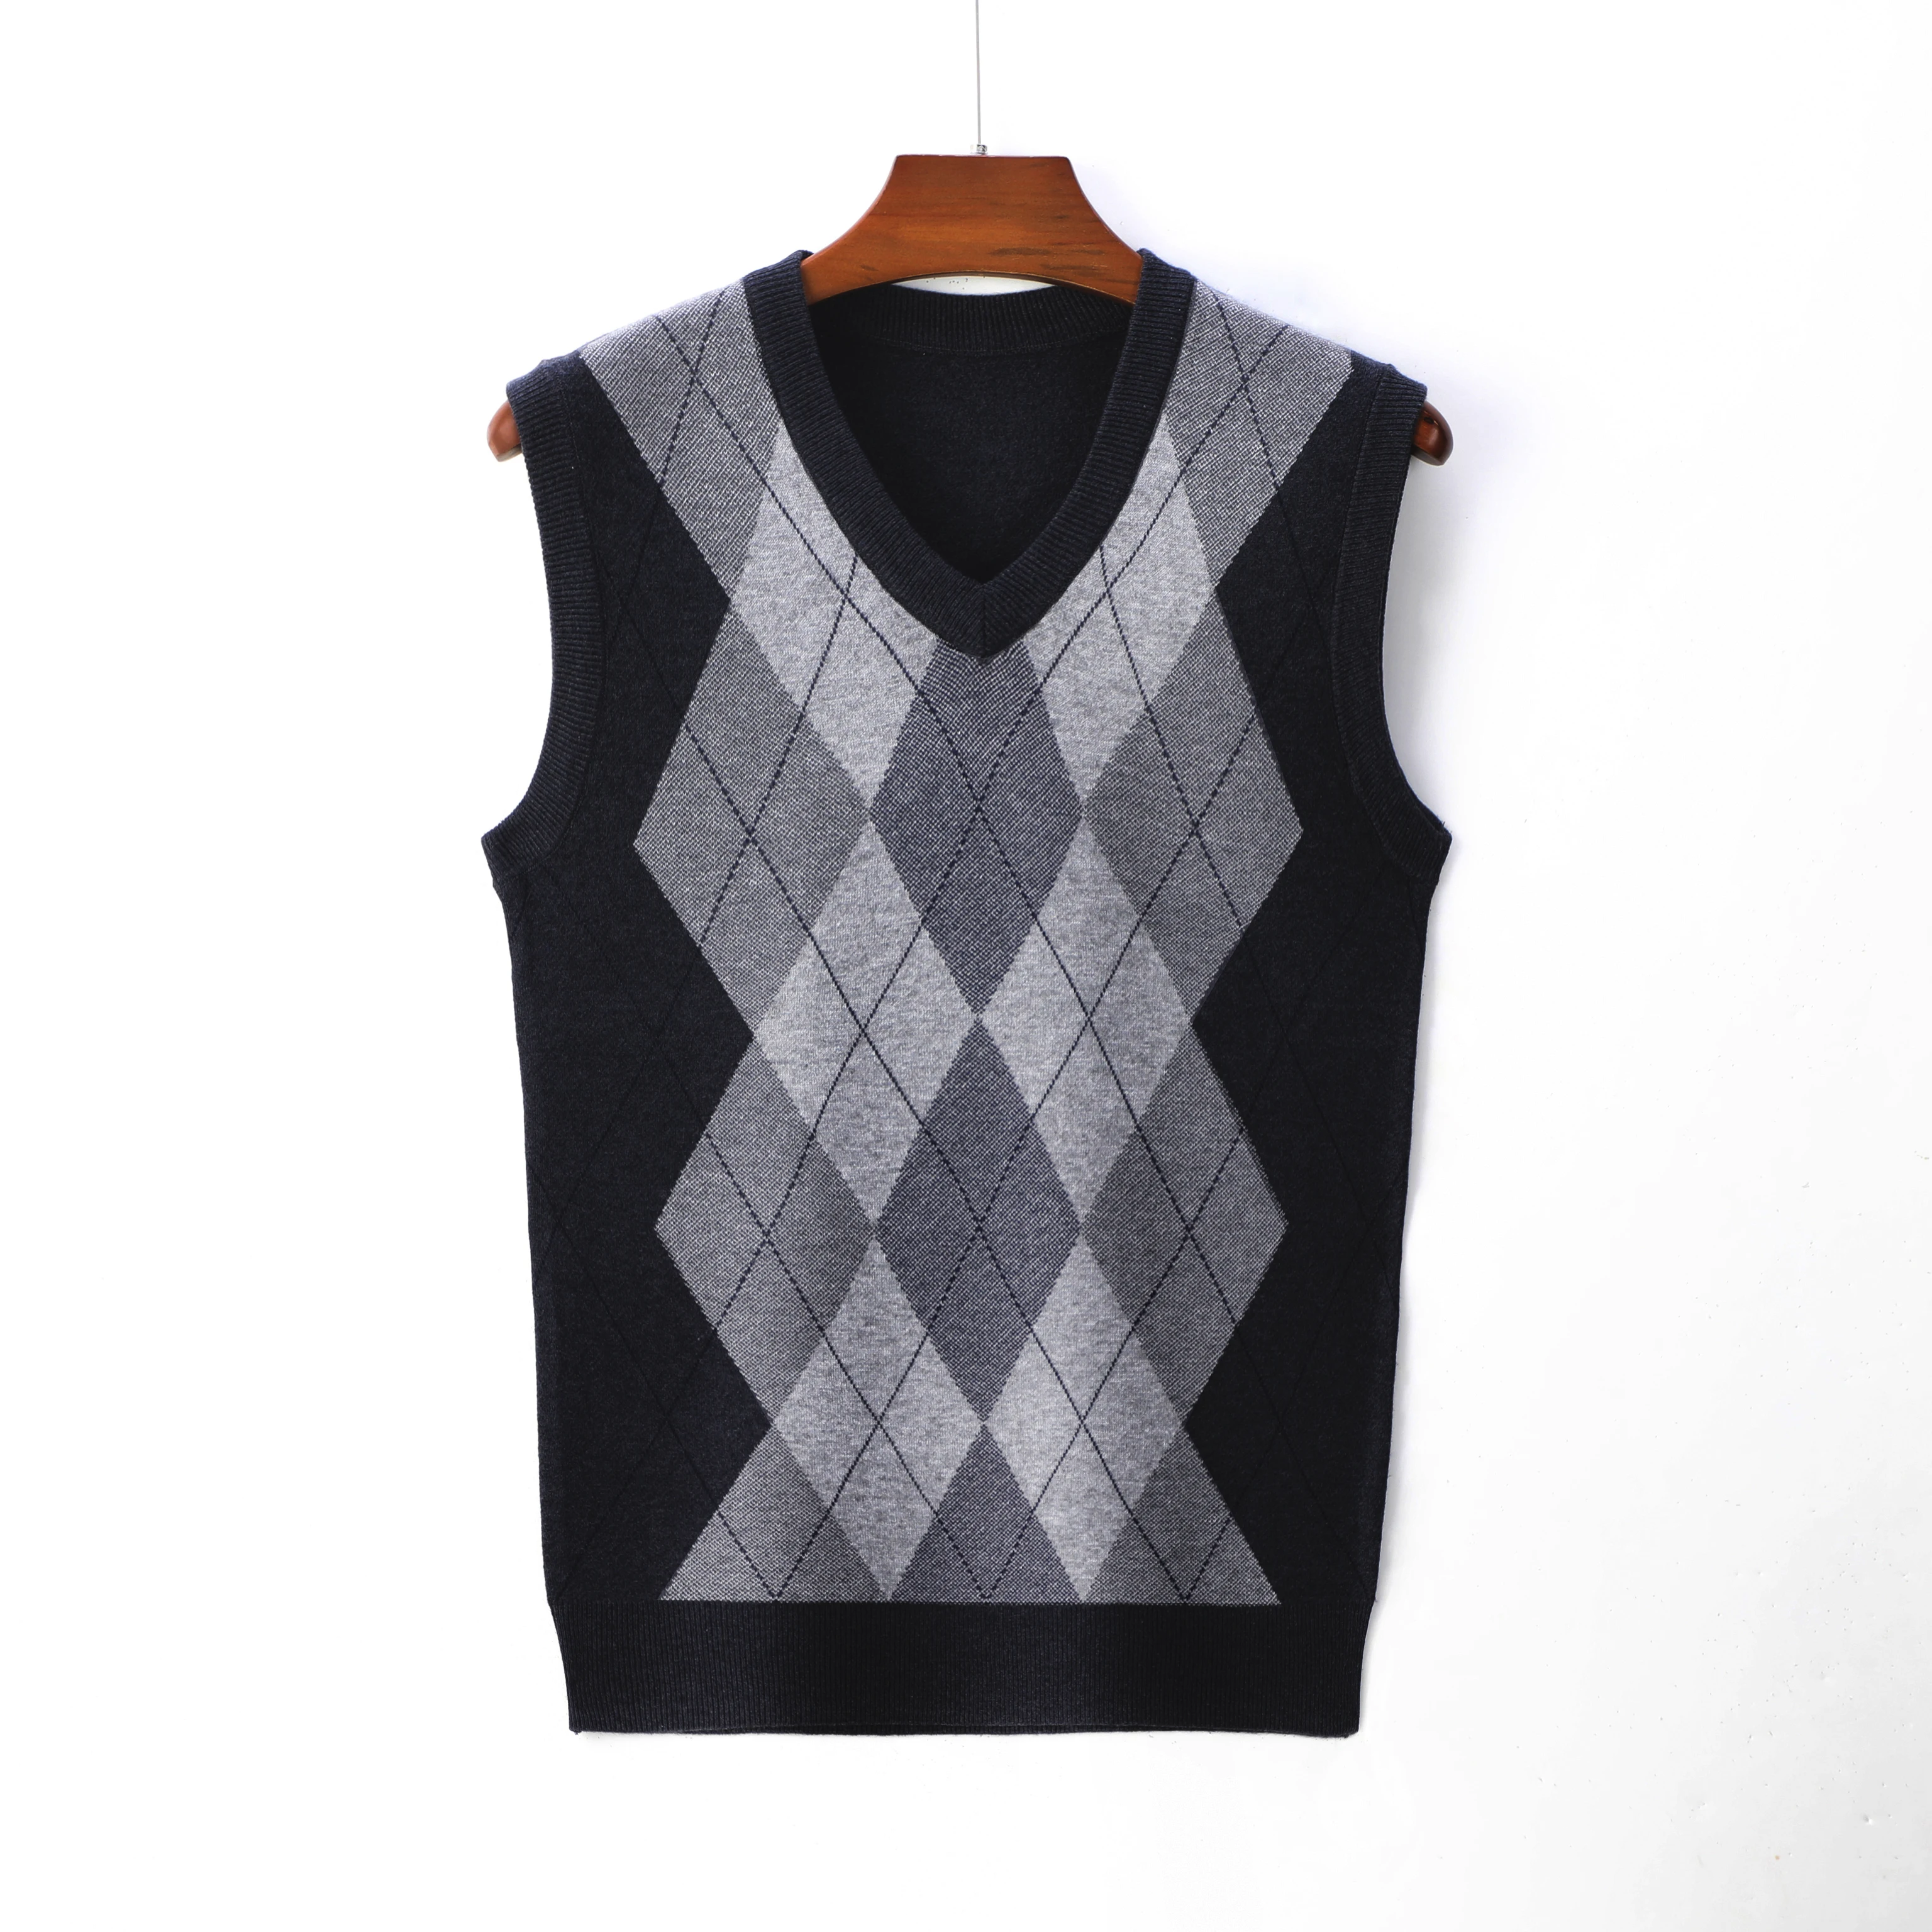 men's sweater vest sleeveless knitted sweater Spring and Autumn 2022 Business casual jacquard men's vest Plus Size 6XL 7XL 8XL images - 6